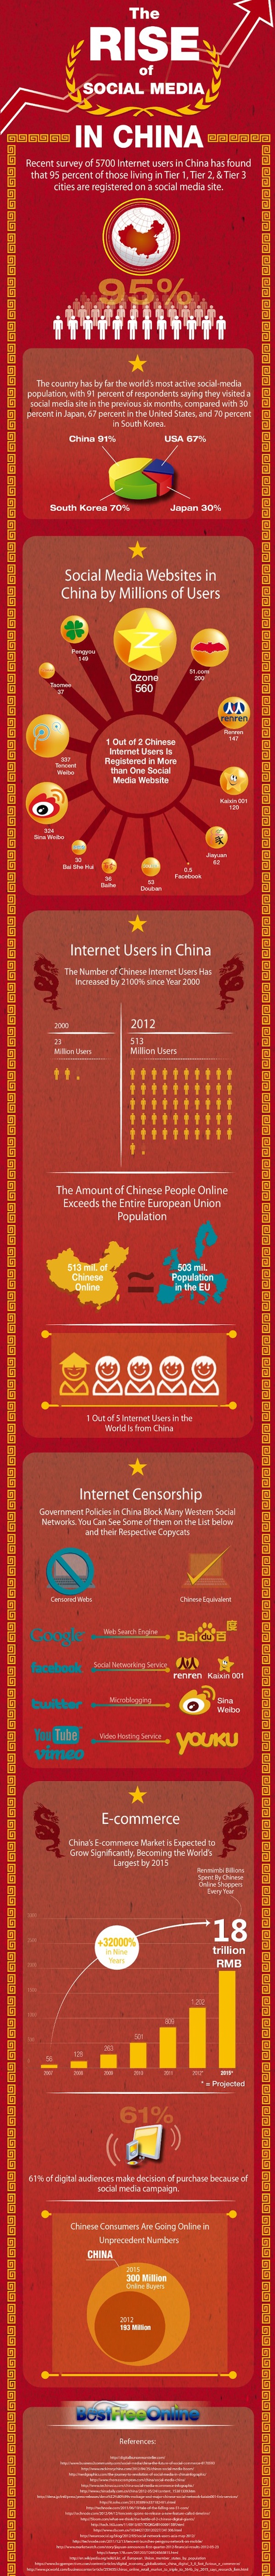 Infographic: The rise of social media in China